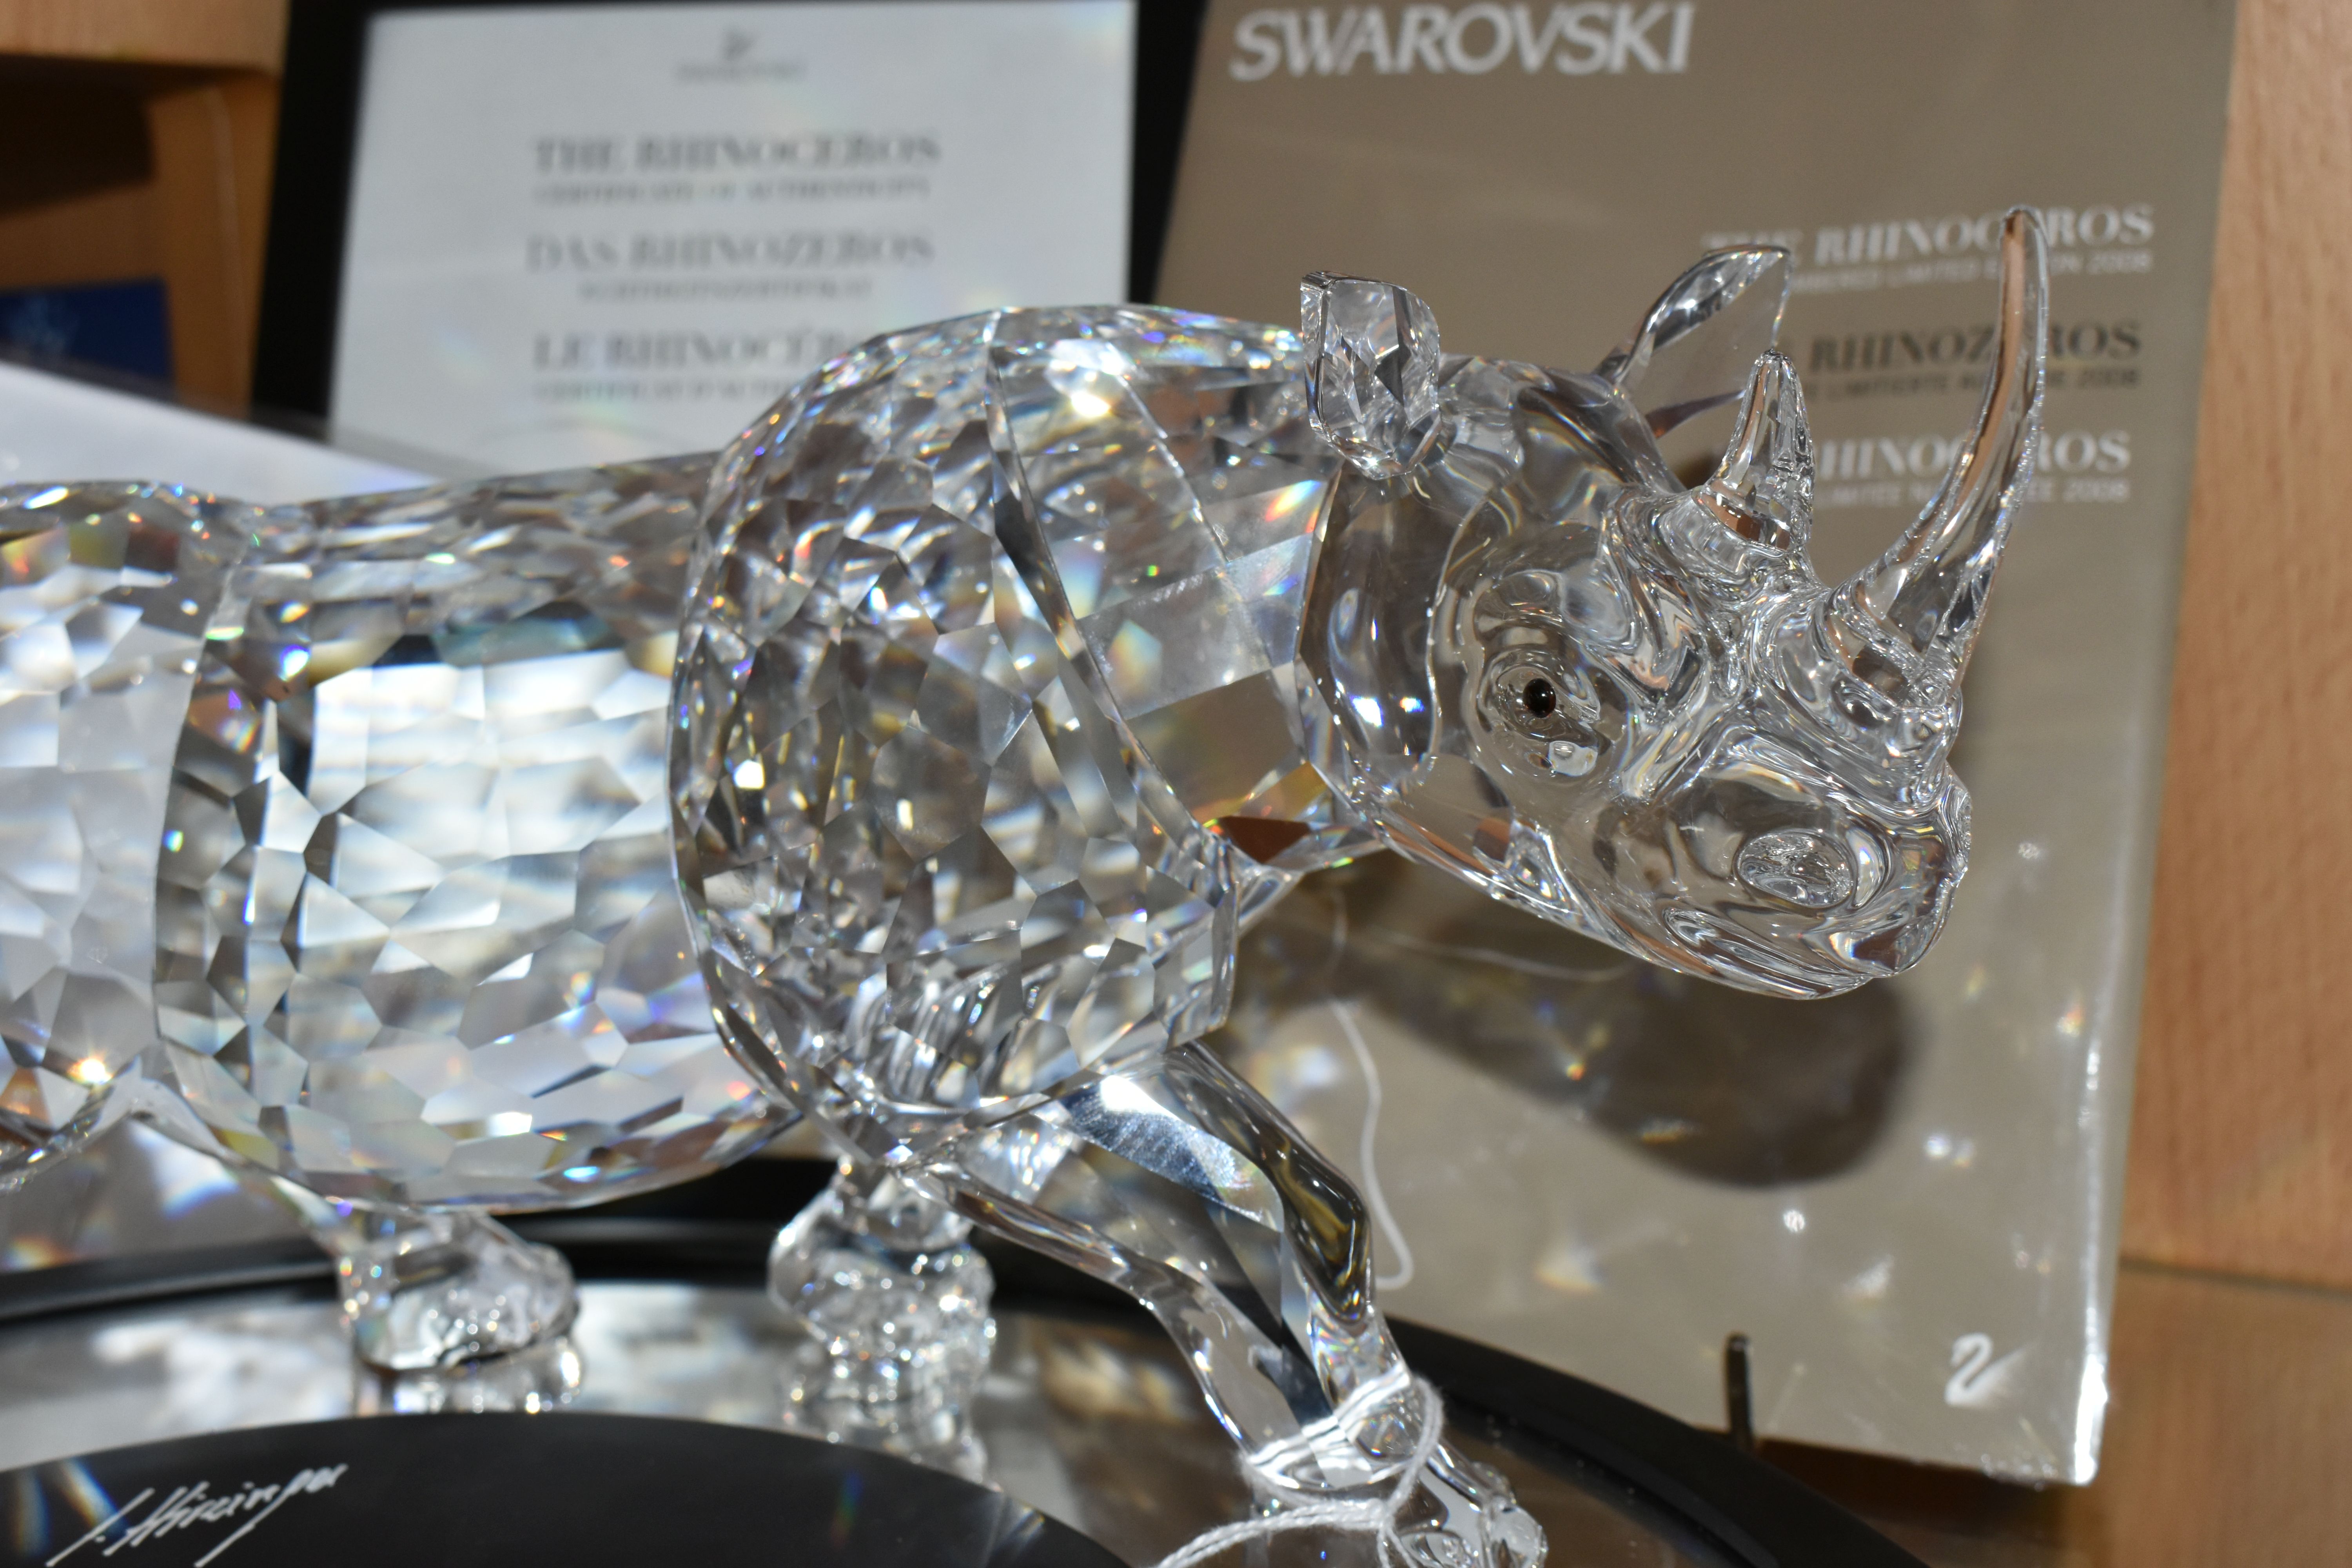 A CASED/OUTER BOX SWAROVSKI CRYSTAL LIMITED EDITION RHINO SCULPTURE, numbered 4825/10000 to - Image 6 of 8